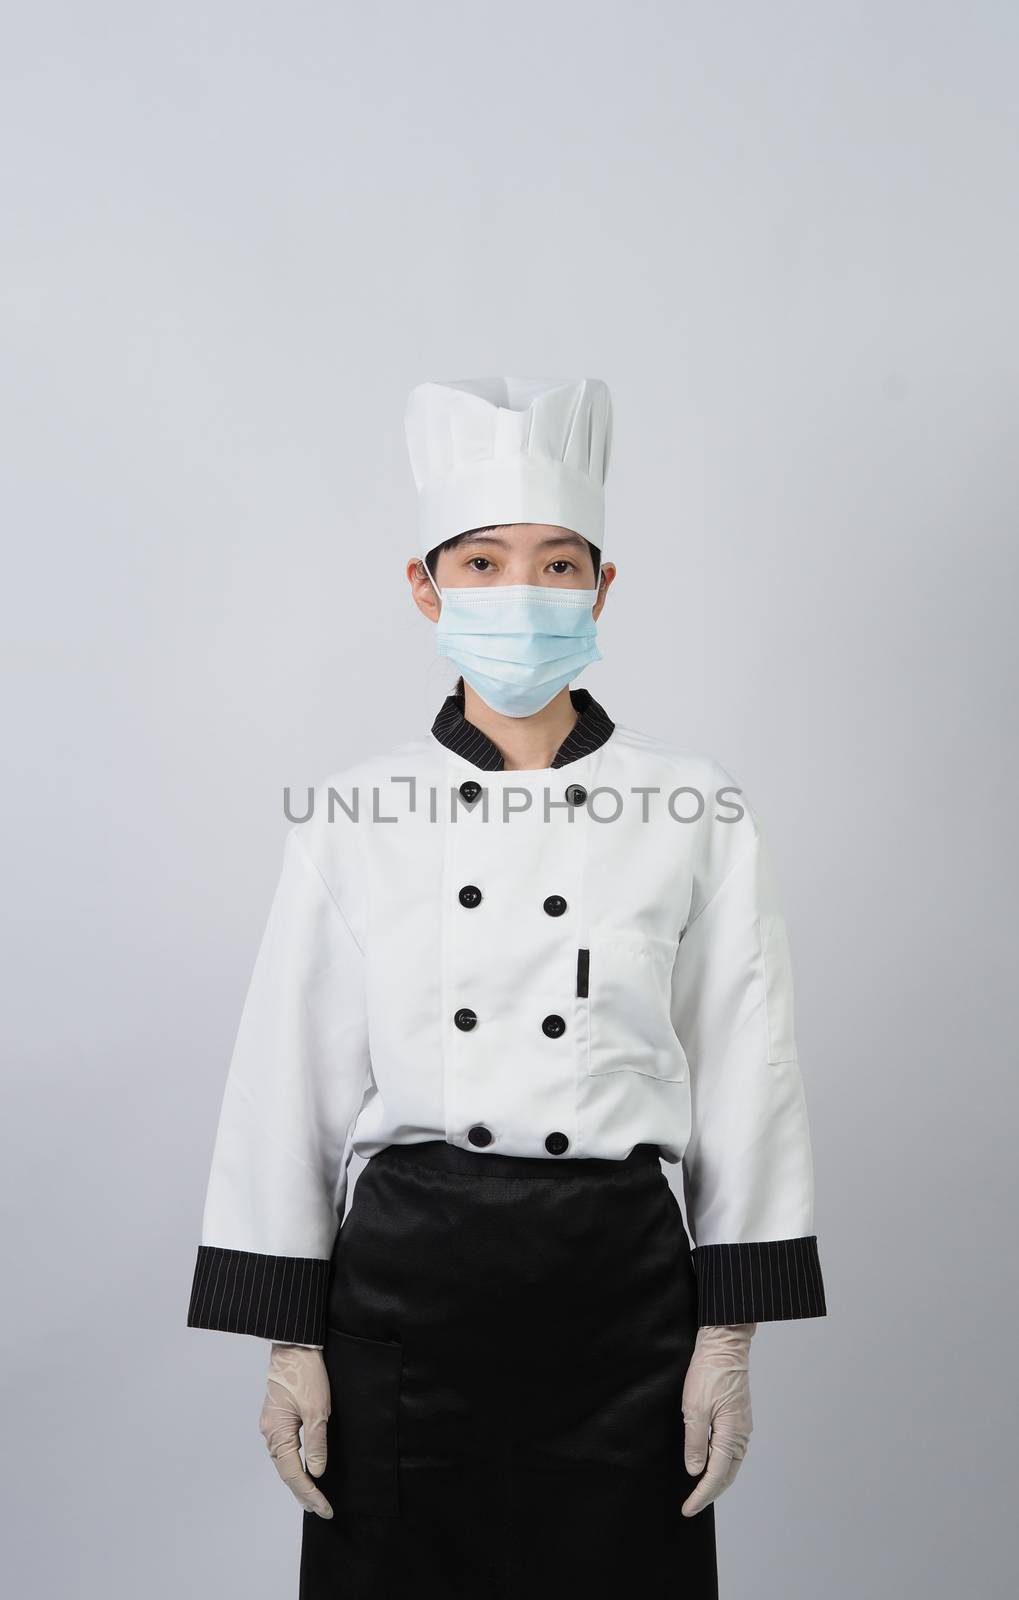 Asian woman chef in uniform with medical face mask and glove. by gnepphoto